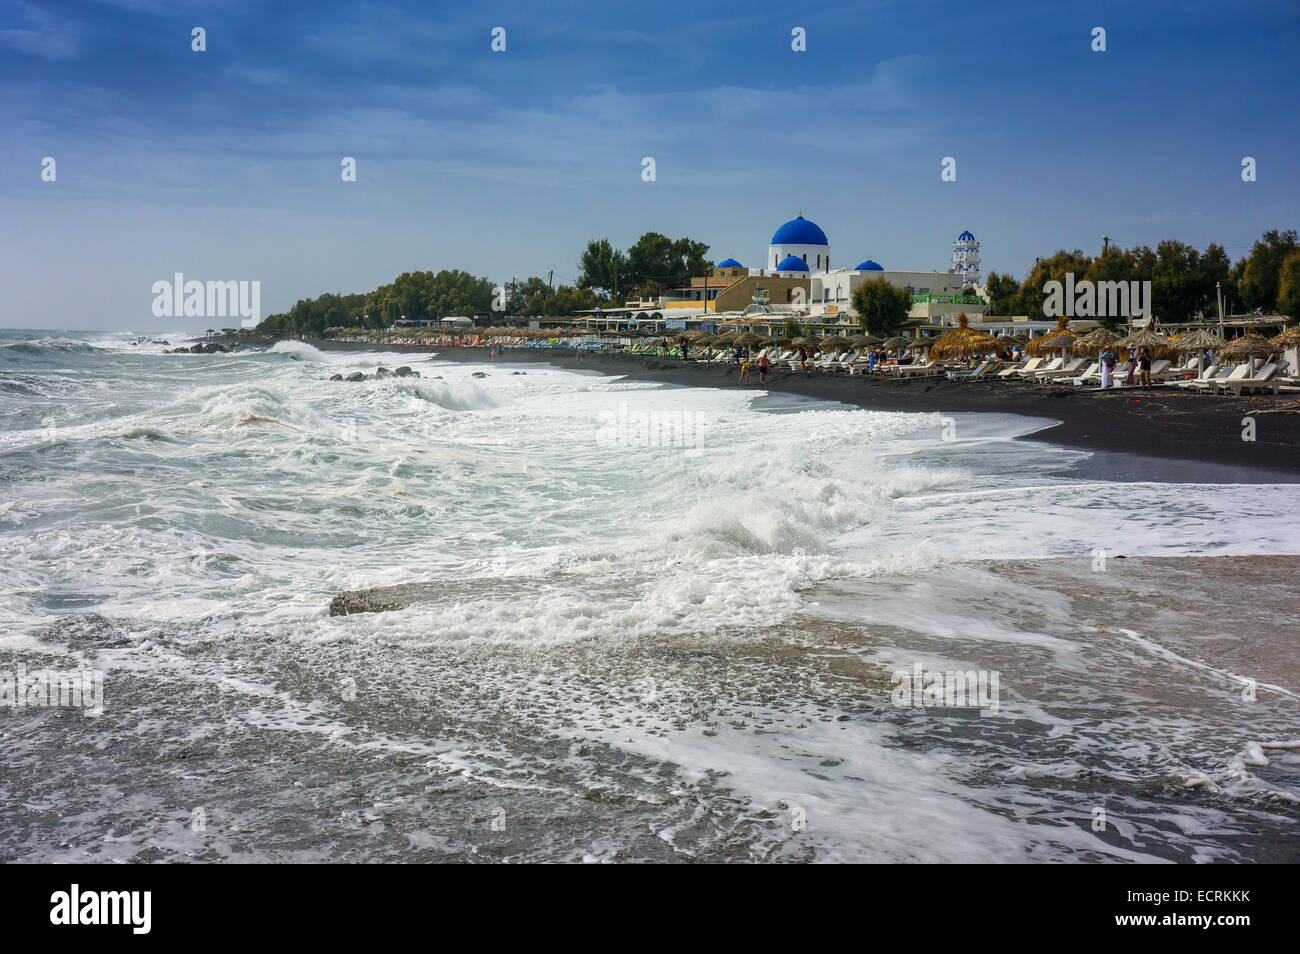 Stormy sea, beach with loungers and blue dome of Greek Orthodox church Stock Photo